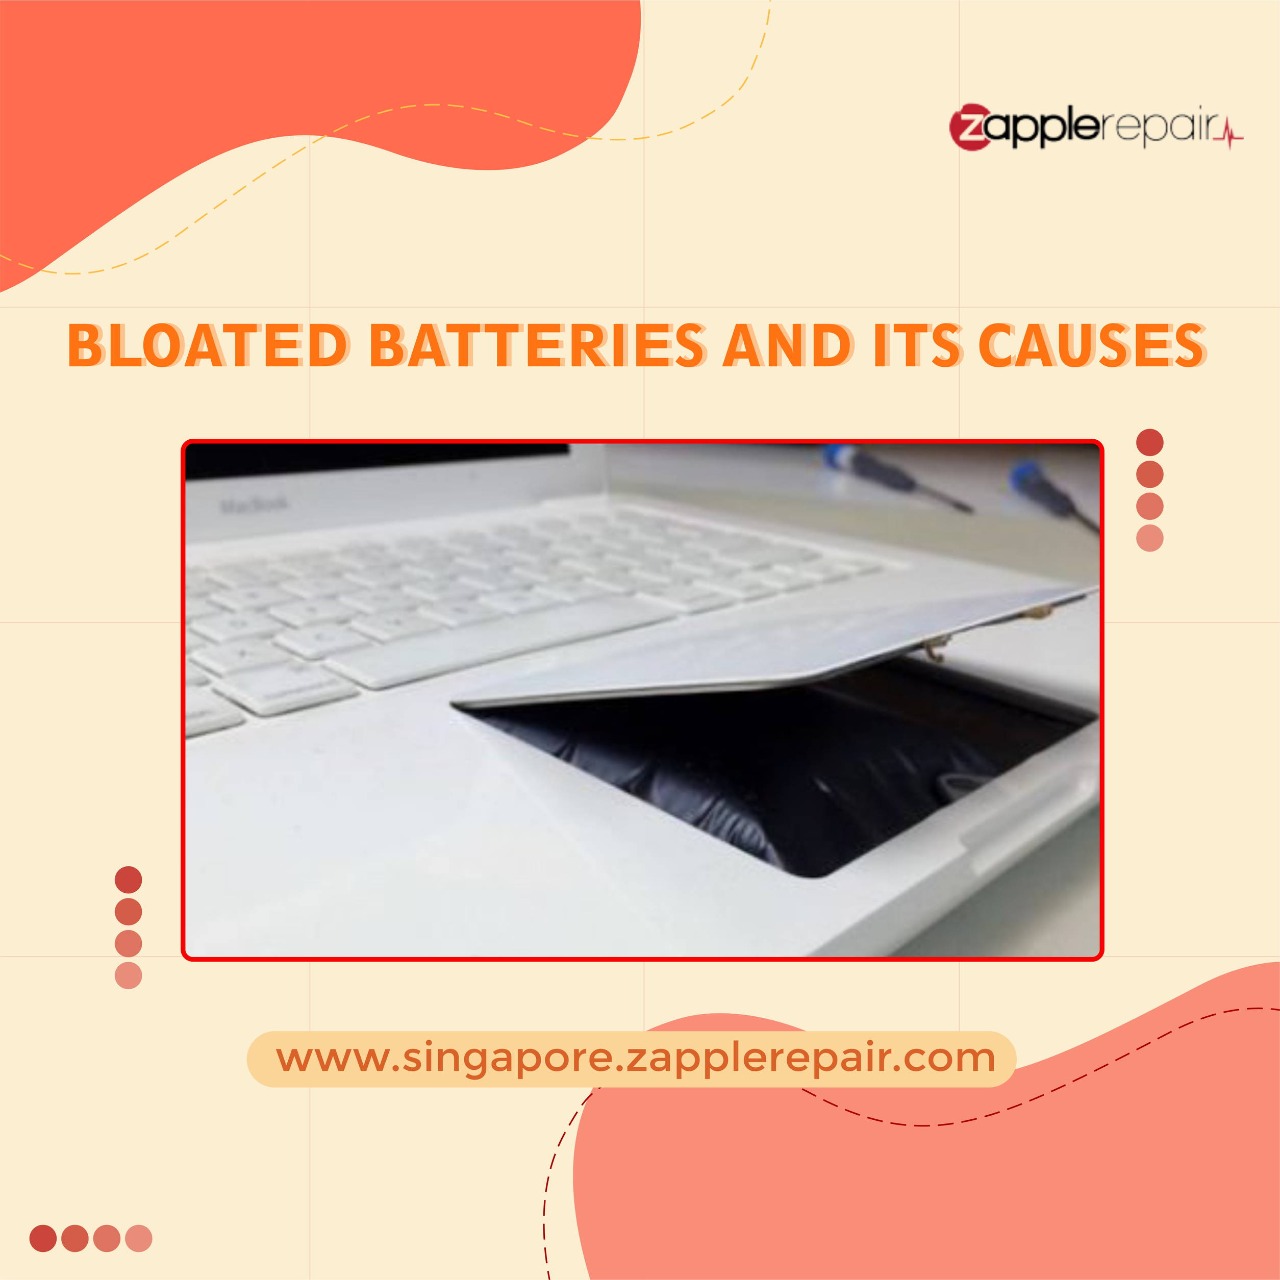 Bloated Batteries and Its Causes